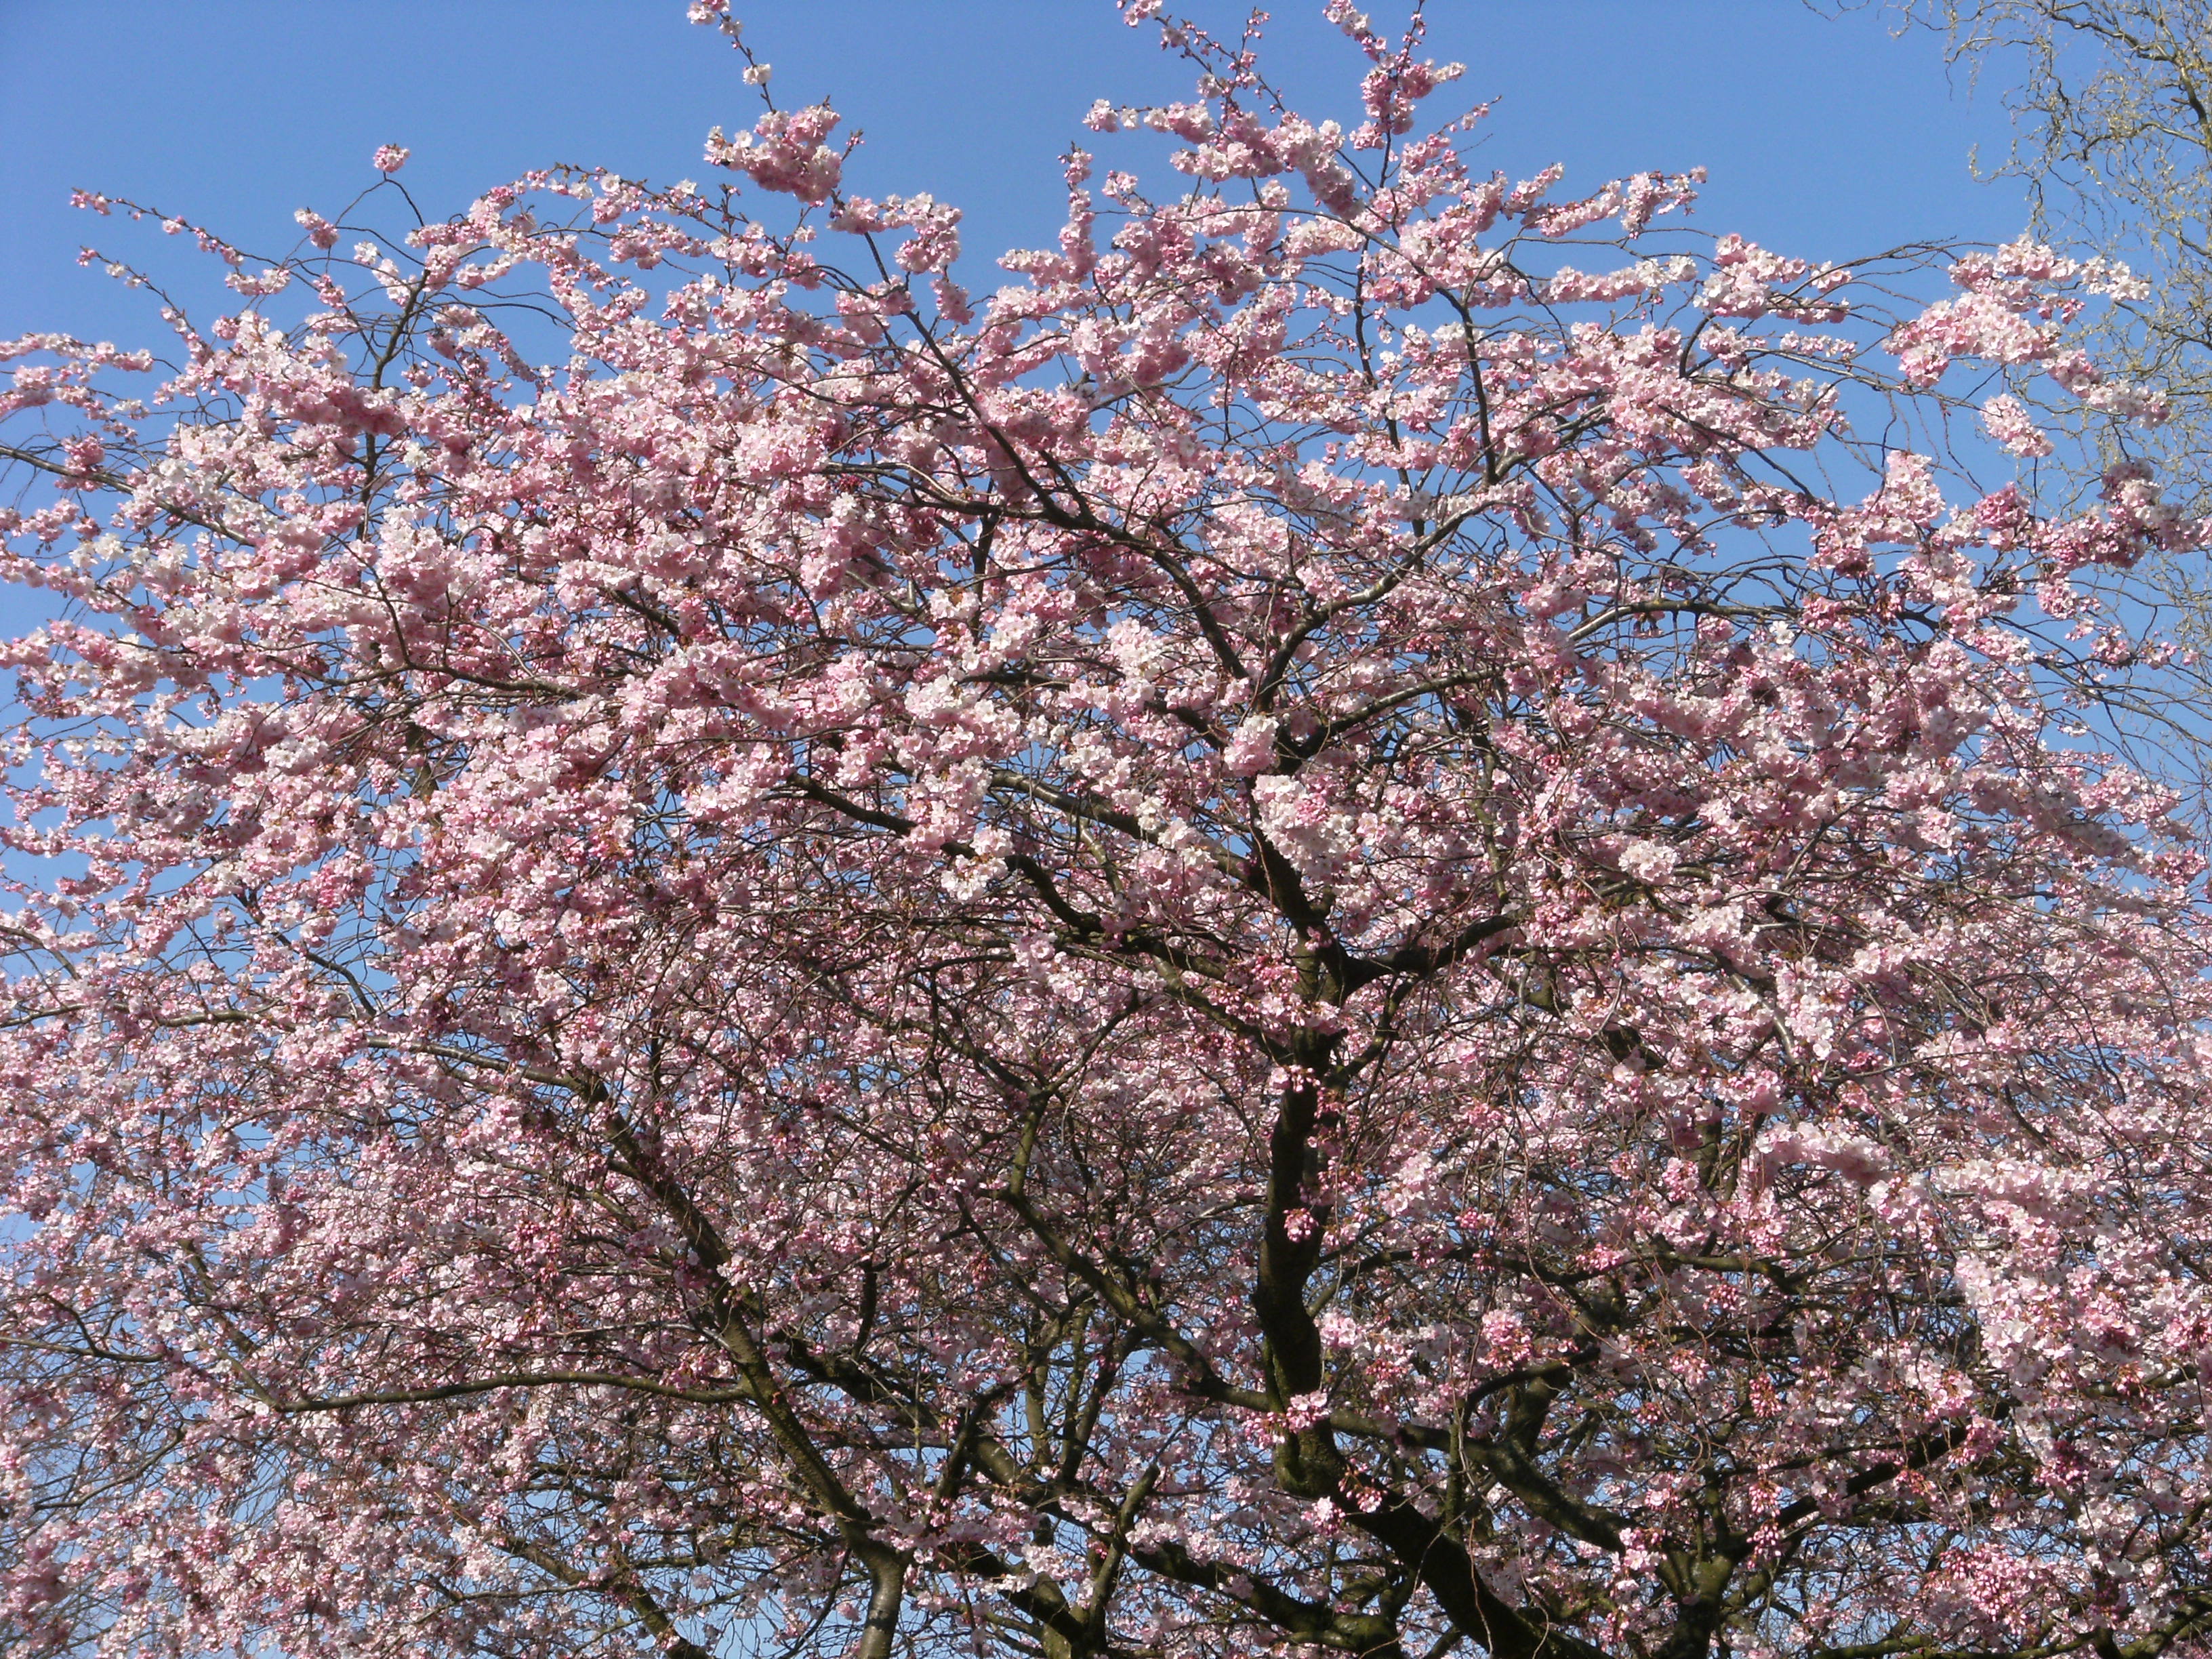 File:Blossoming tree in Dronten.JPG - Wikimedia Commons